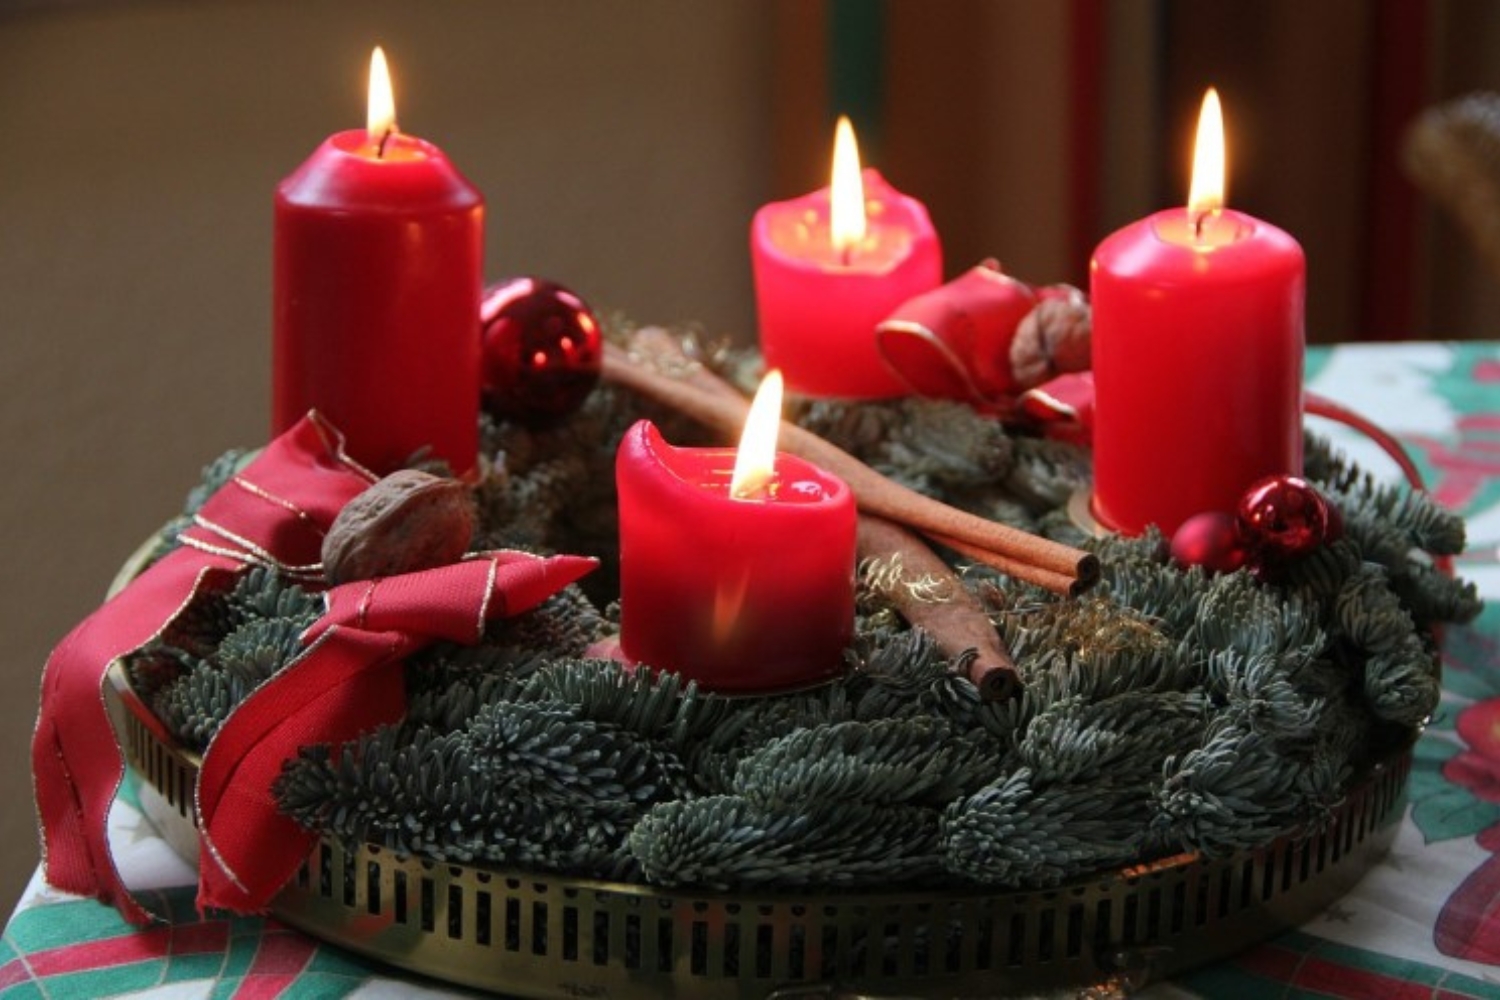 Czech Christmas from A to Z - Dates, Traditions, Superstitions